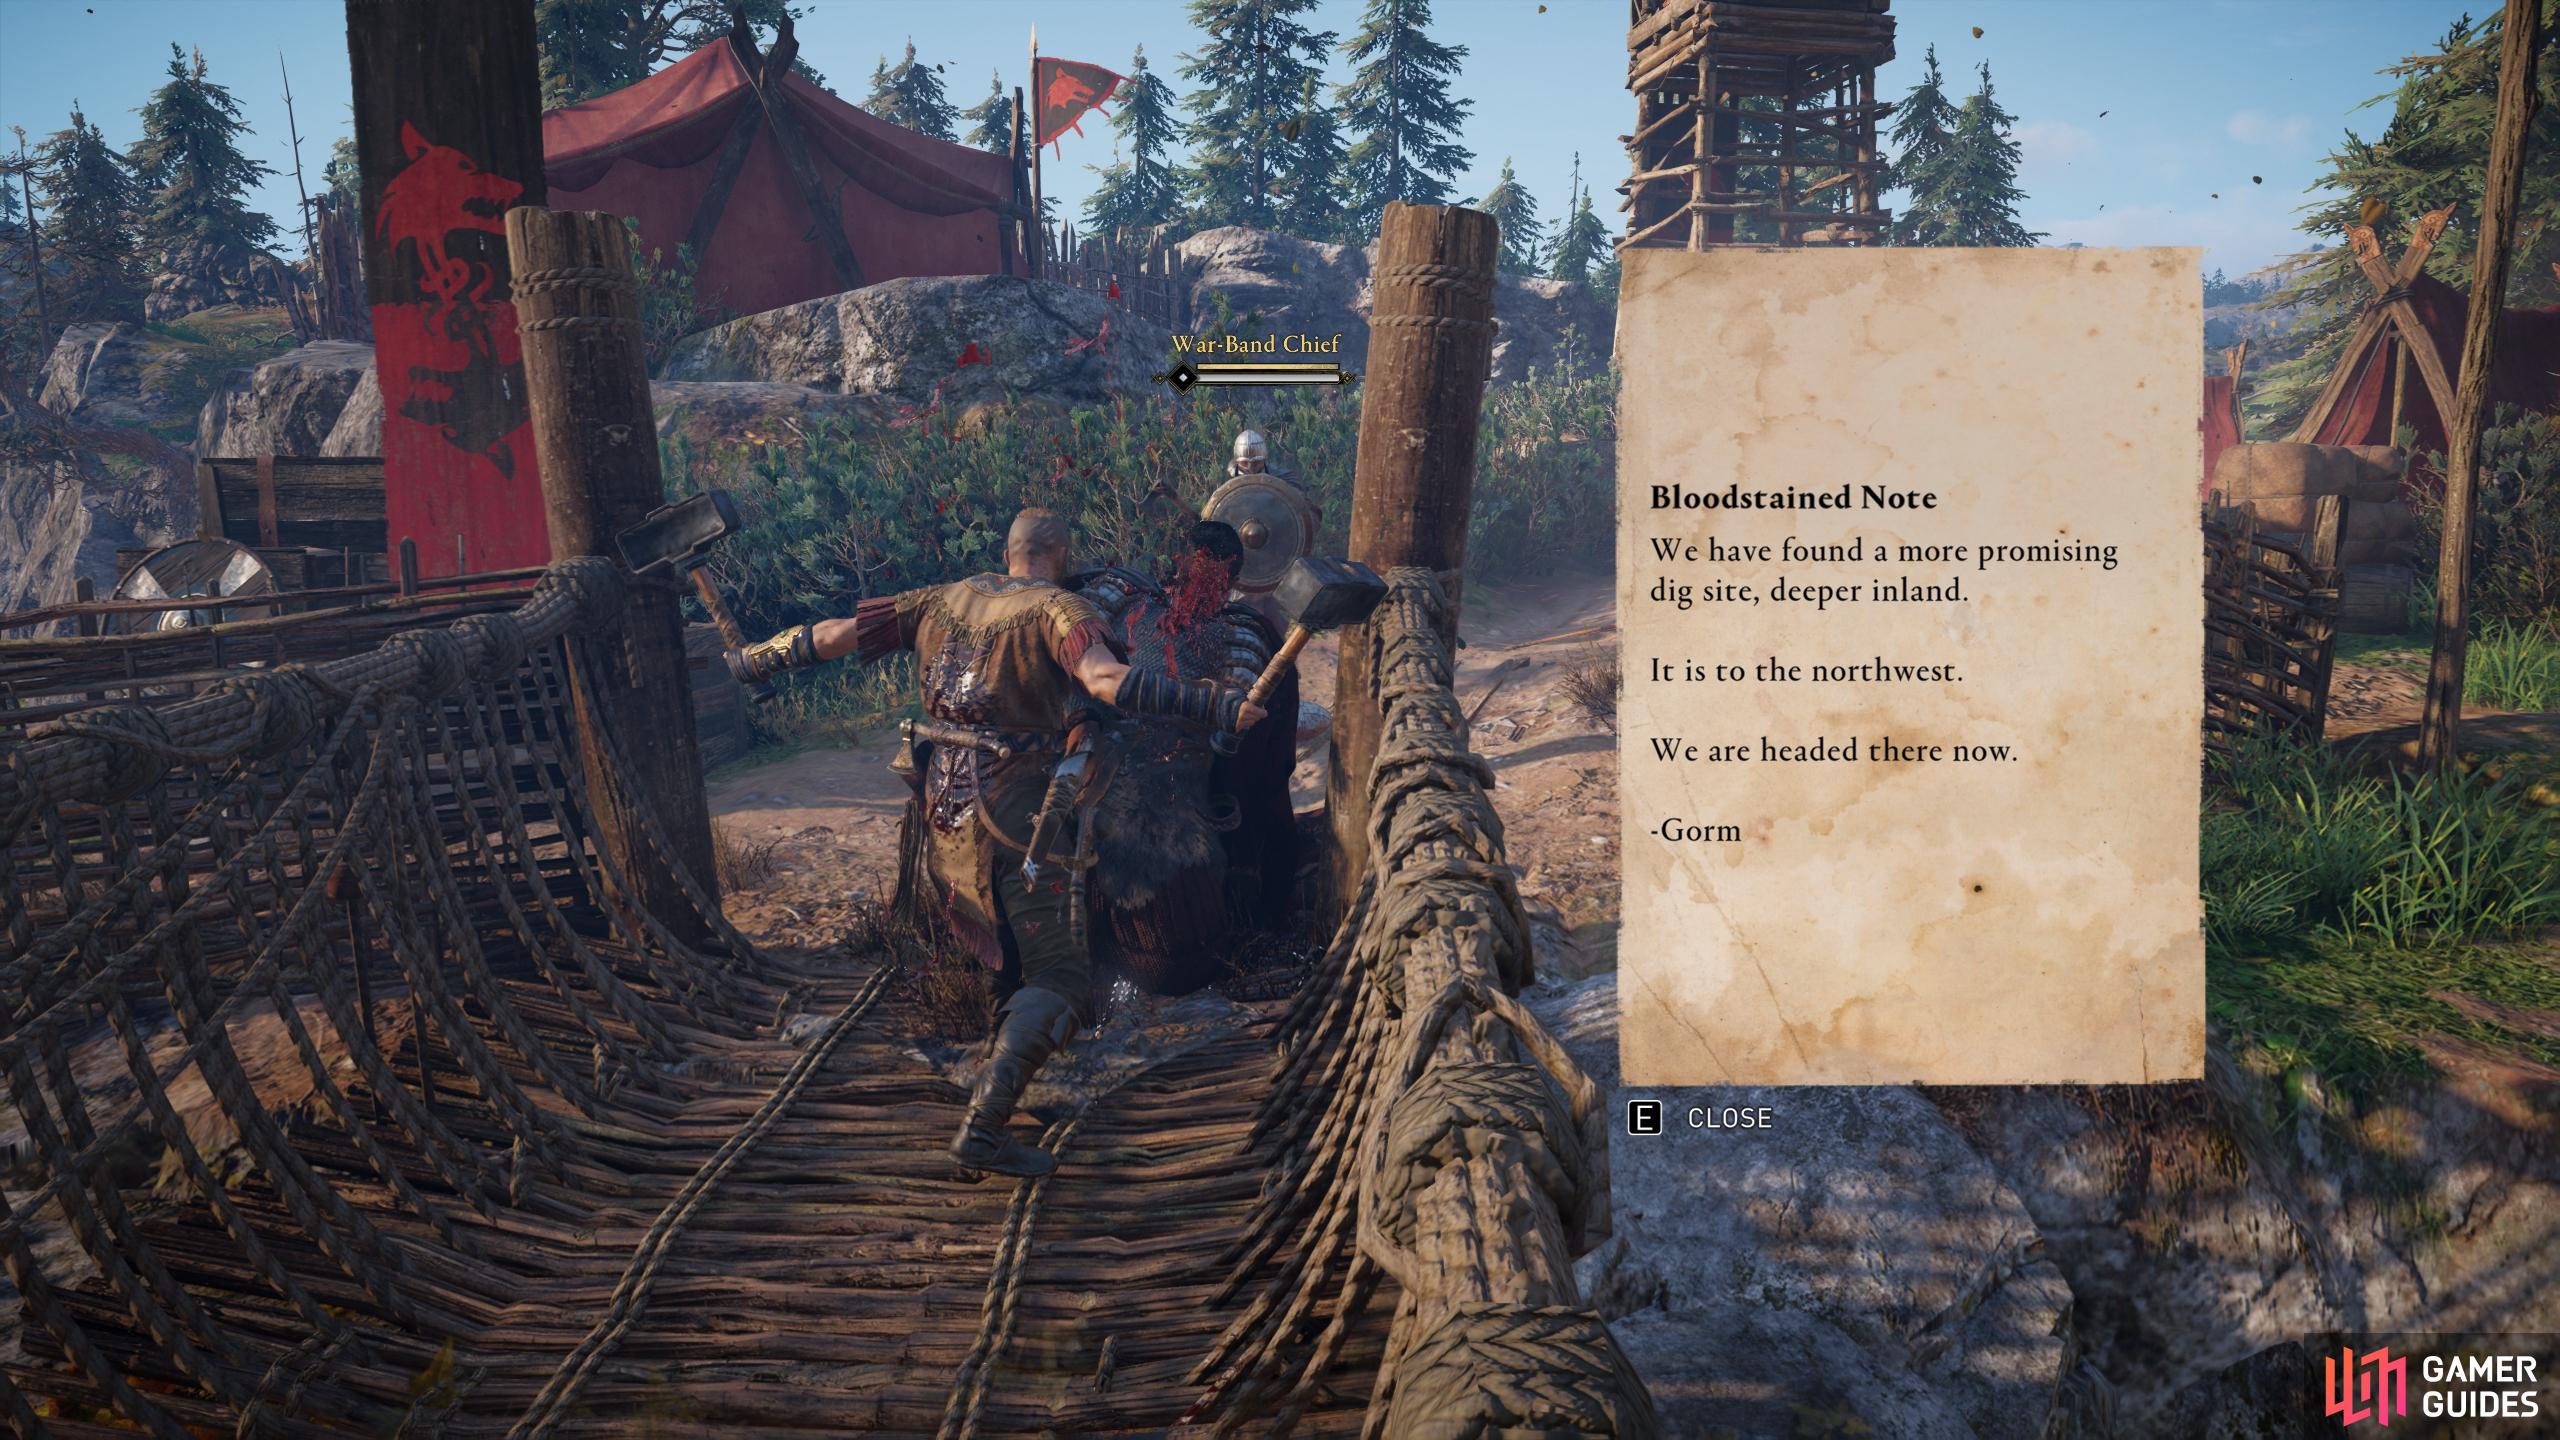 Killing the War-Band Chief at Brúhamarr Outpost will provide you with the Bloodstained Note, indicating the location of Gorm.